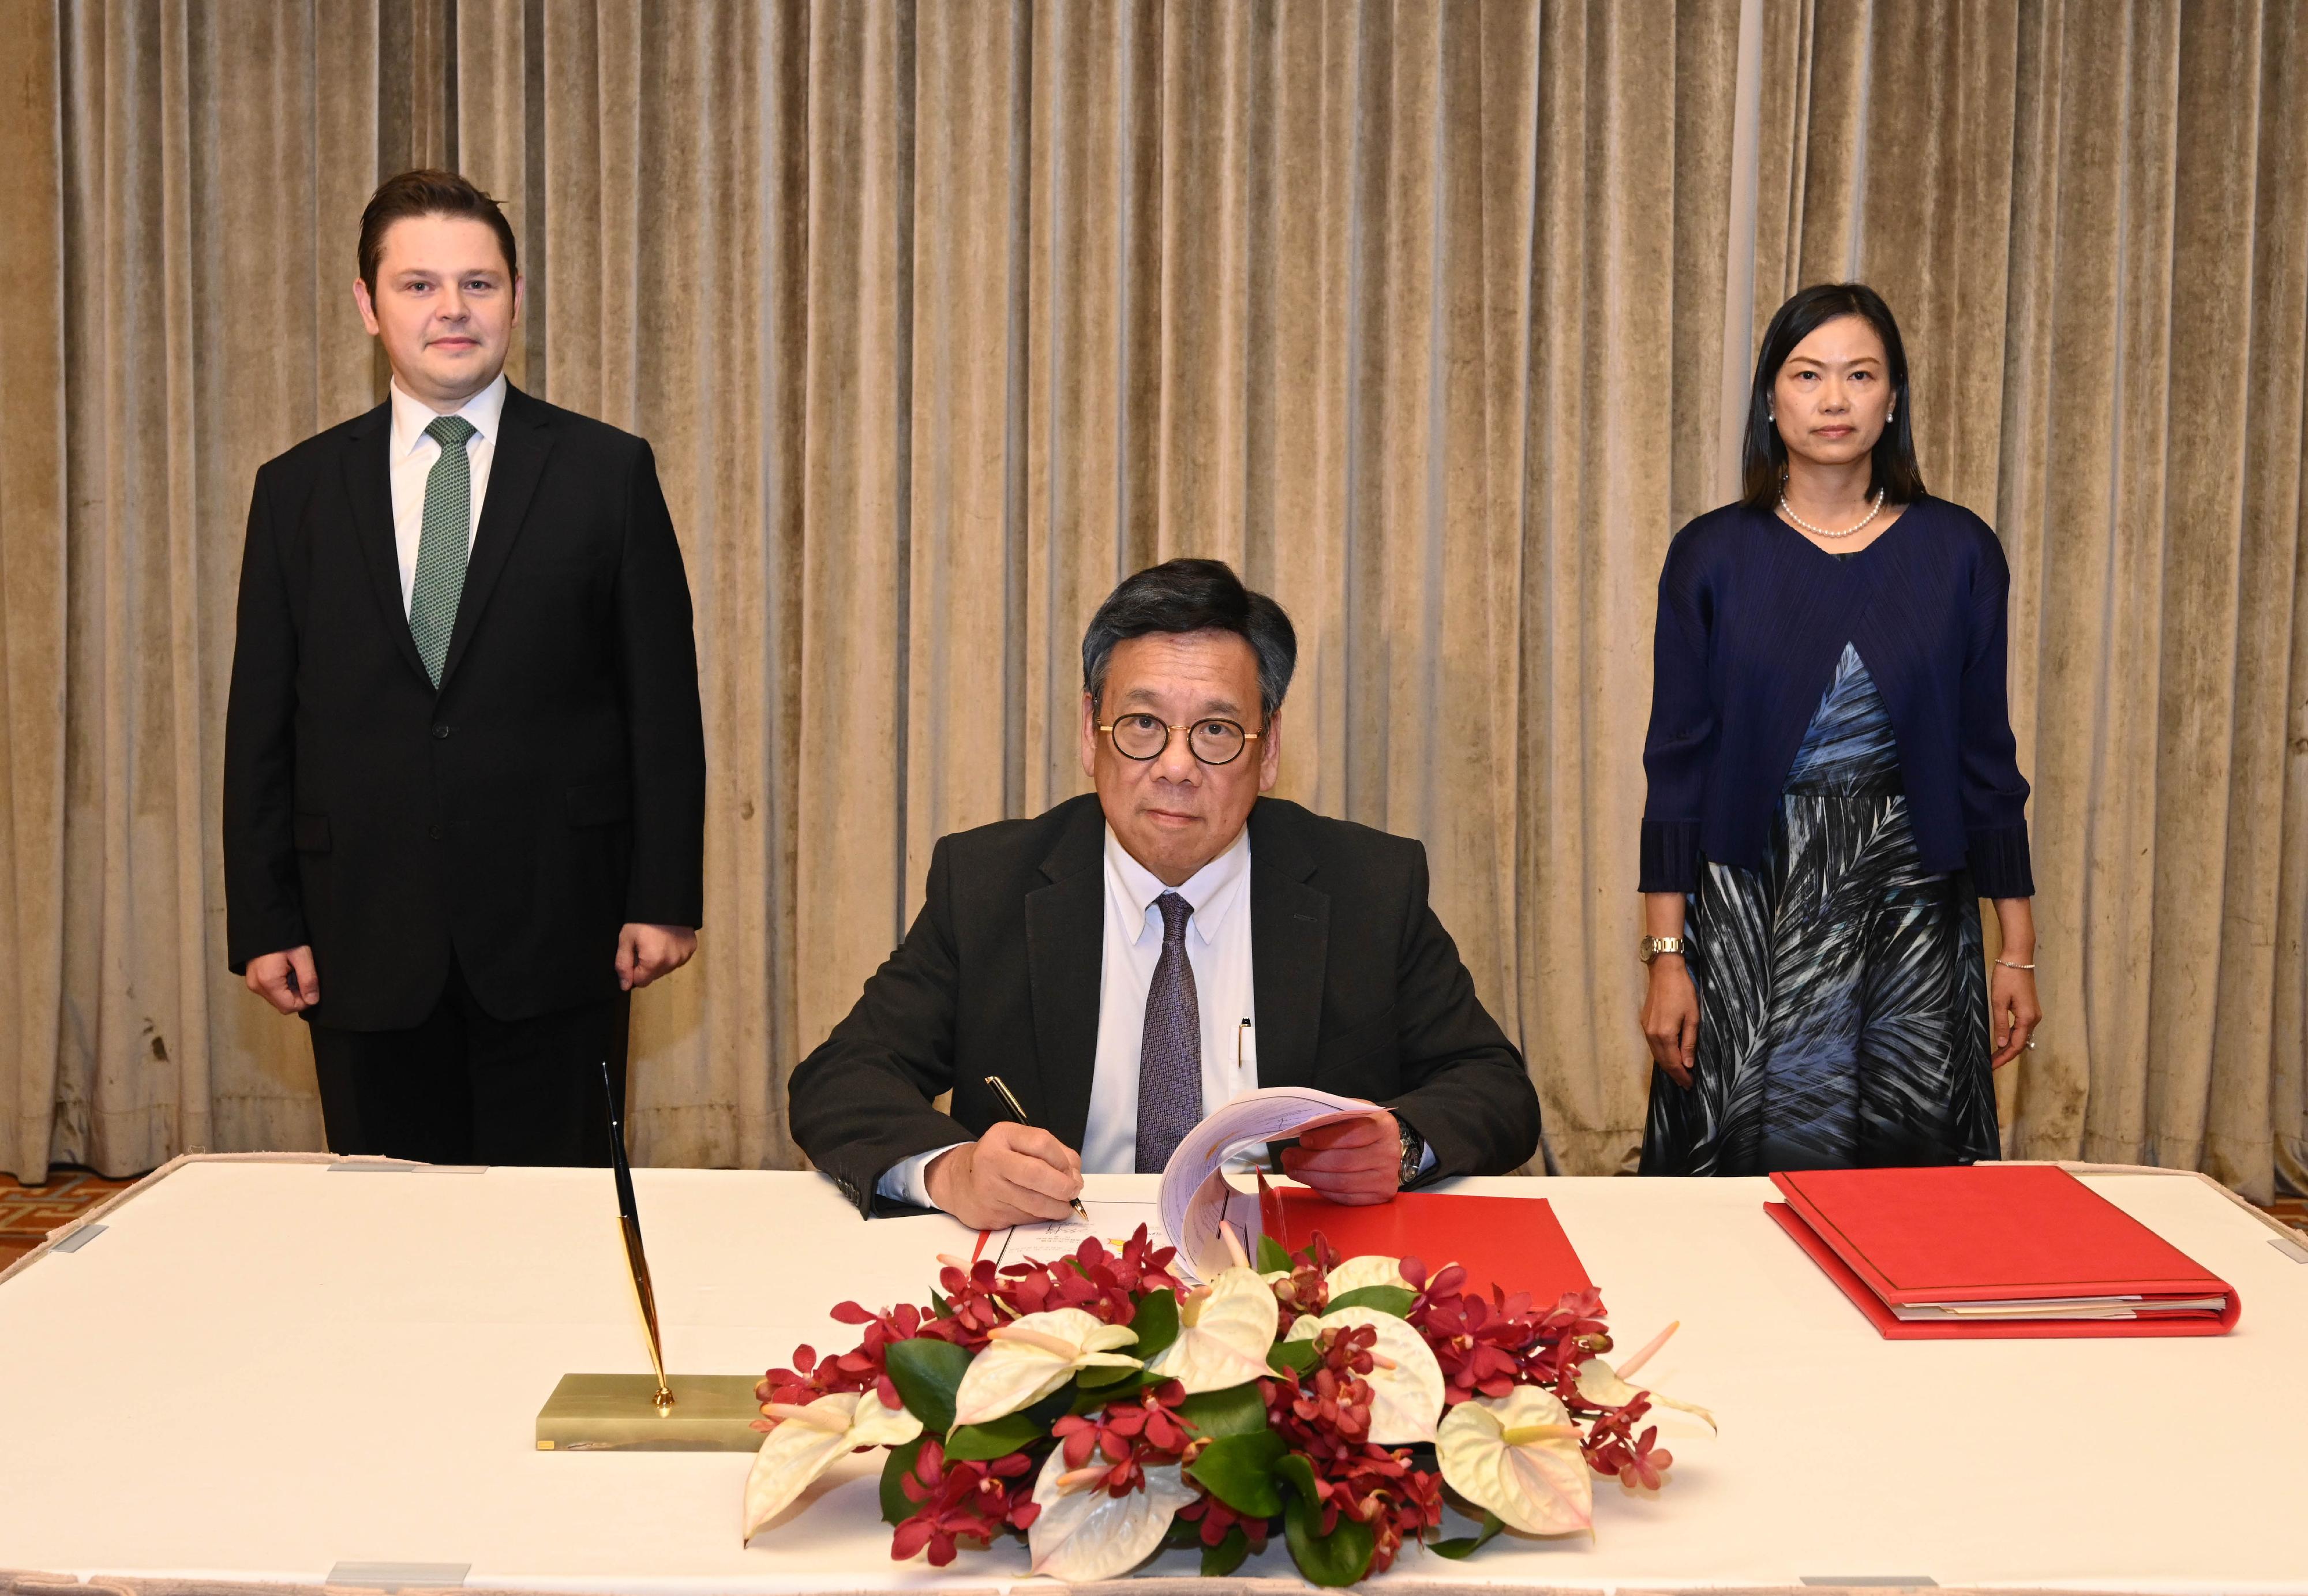 The Secretary for Commerce and Economic Development, Mr Algernon Yau (front), witnessed by the Consul General of Türkiye in Hong Kong, Mr Kerim Sercan Evcin (left, back row), and accompanied by the Director-General of Trade and Industry, Ms Maggie Wong (right, back row), signs the Hong Kong-Türkiye Investment Promotion and Protection Agreement today (October 31).